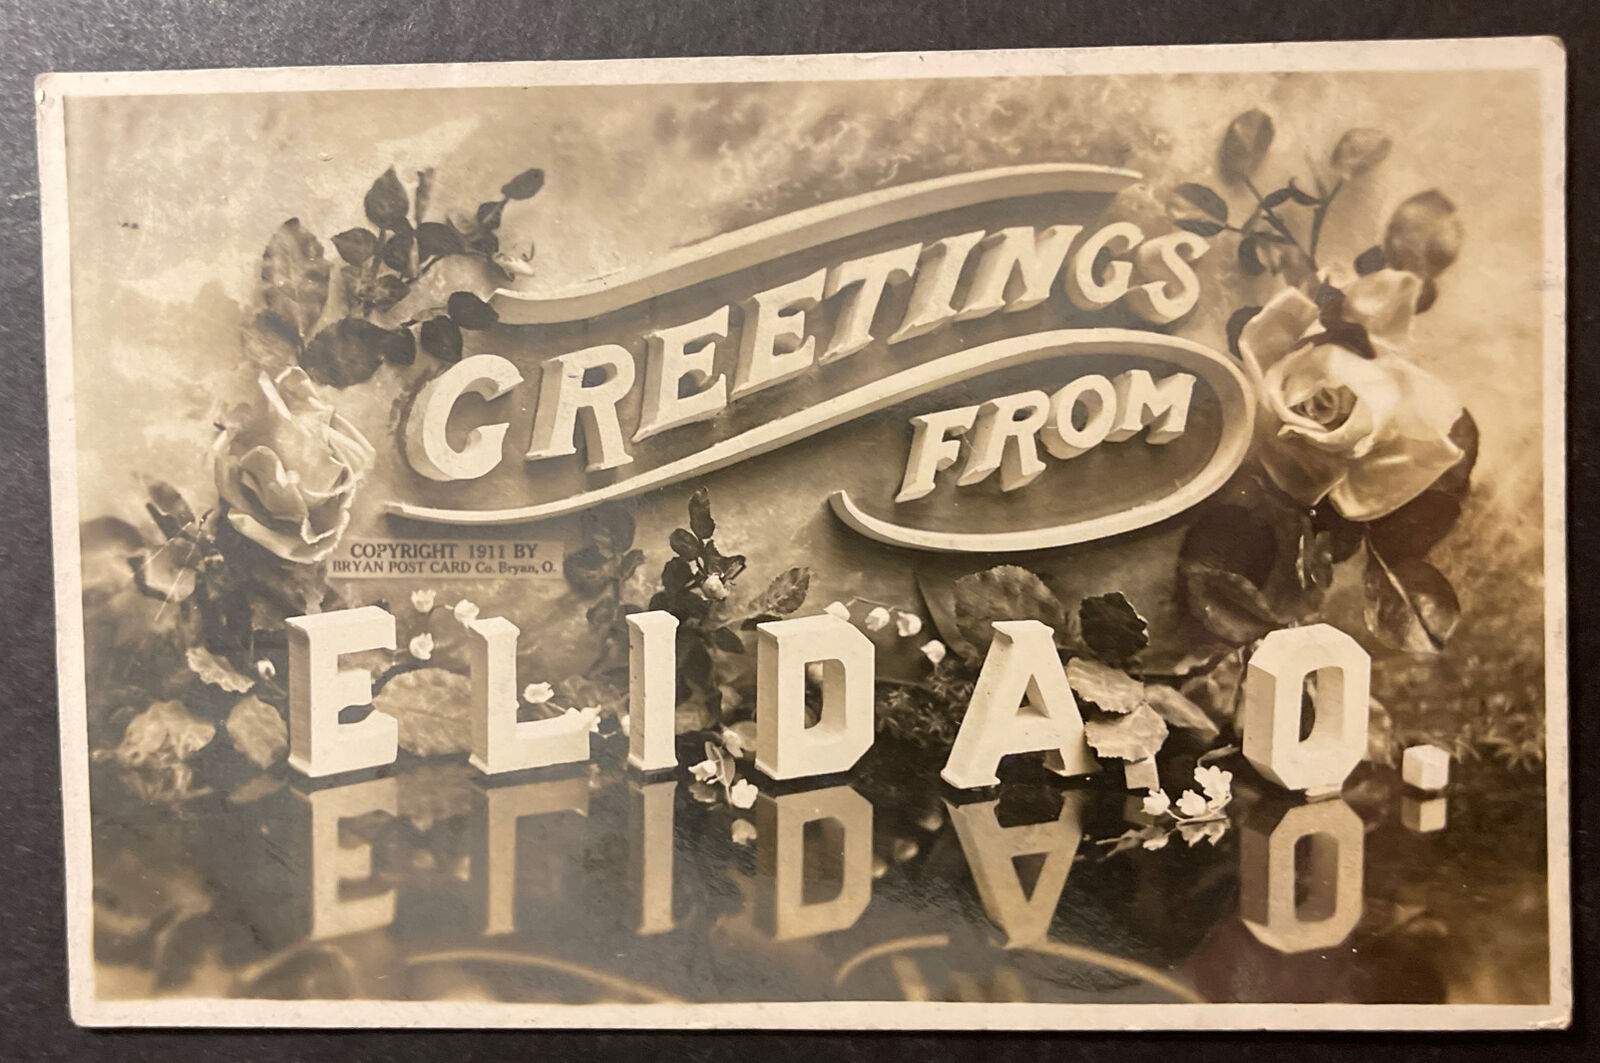 Greetings from Elida Ohio RPPC cprt 1911 Bryan Post Card Co Large Letter